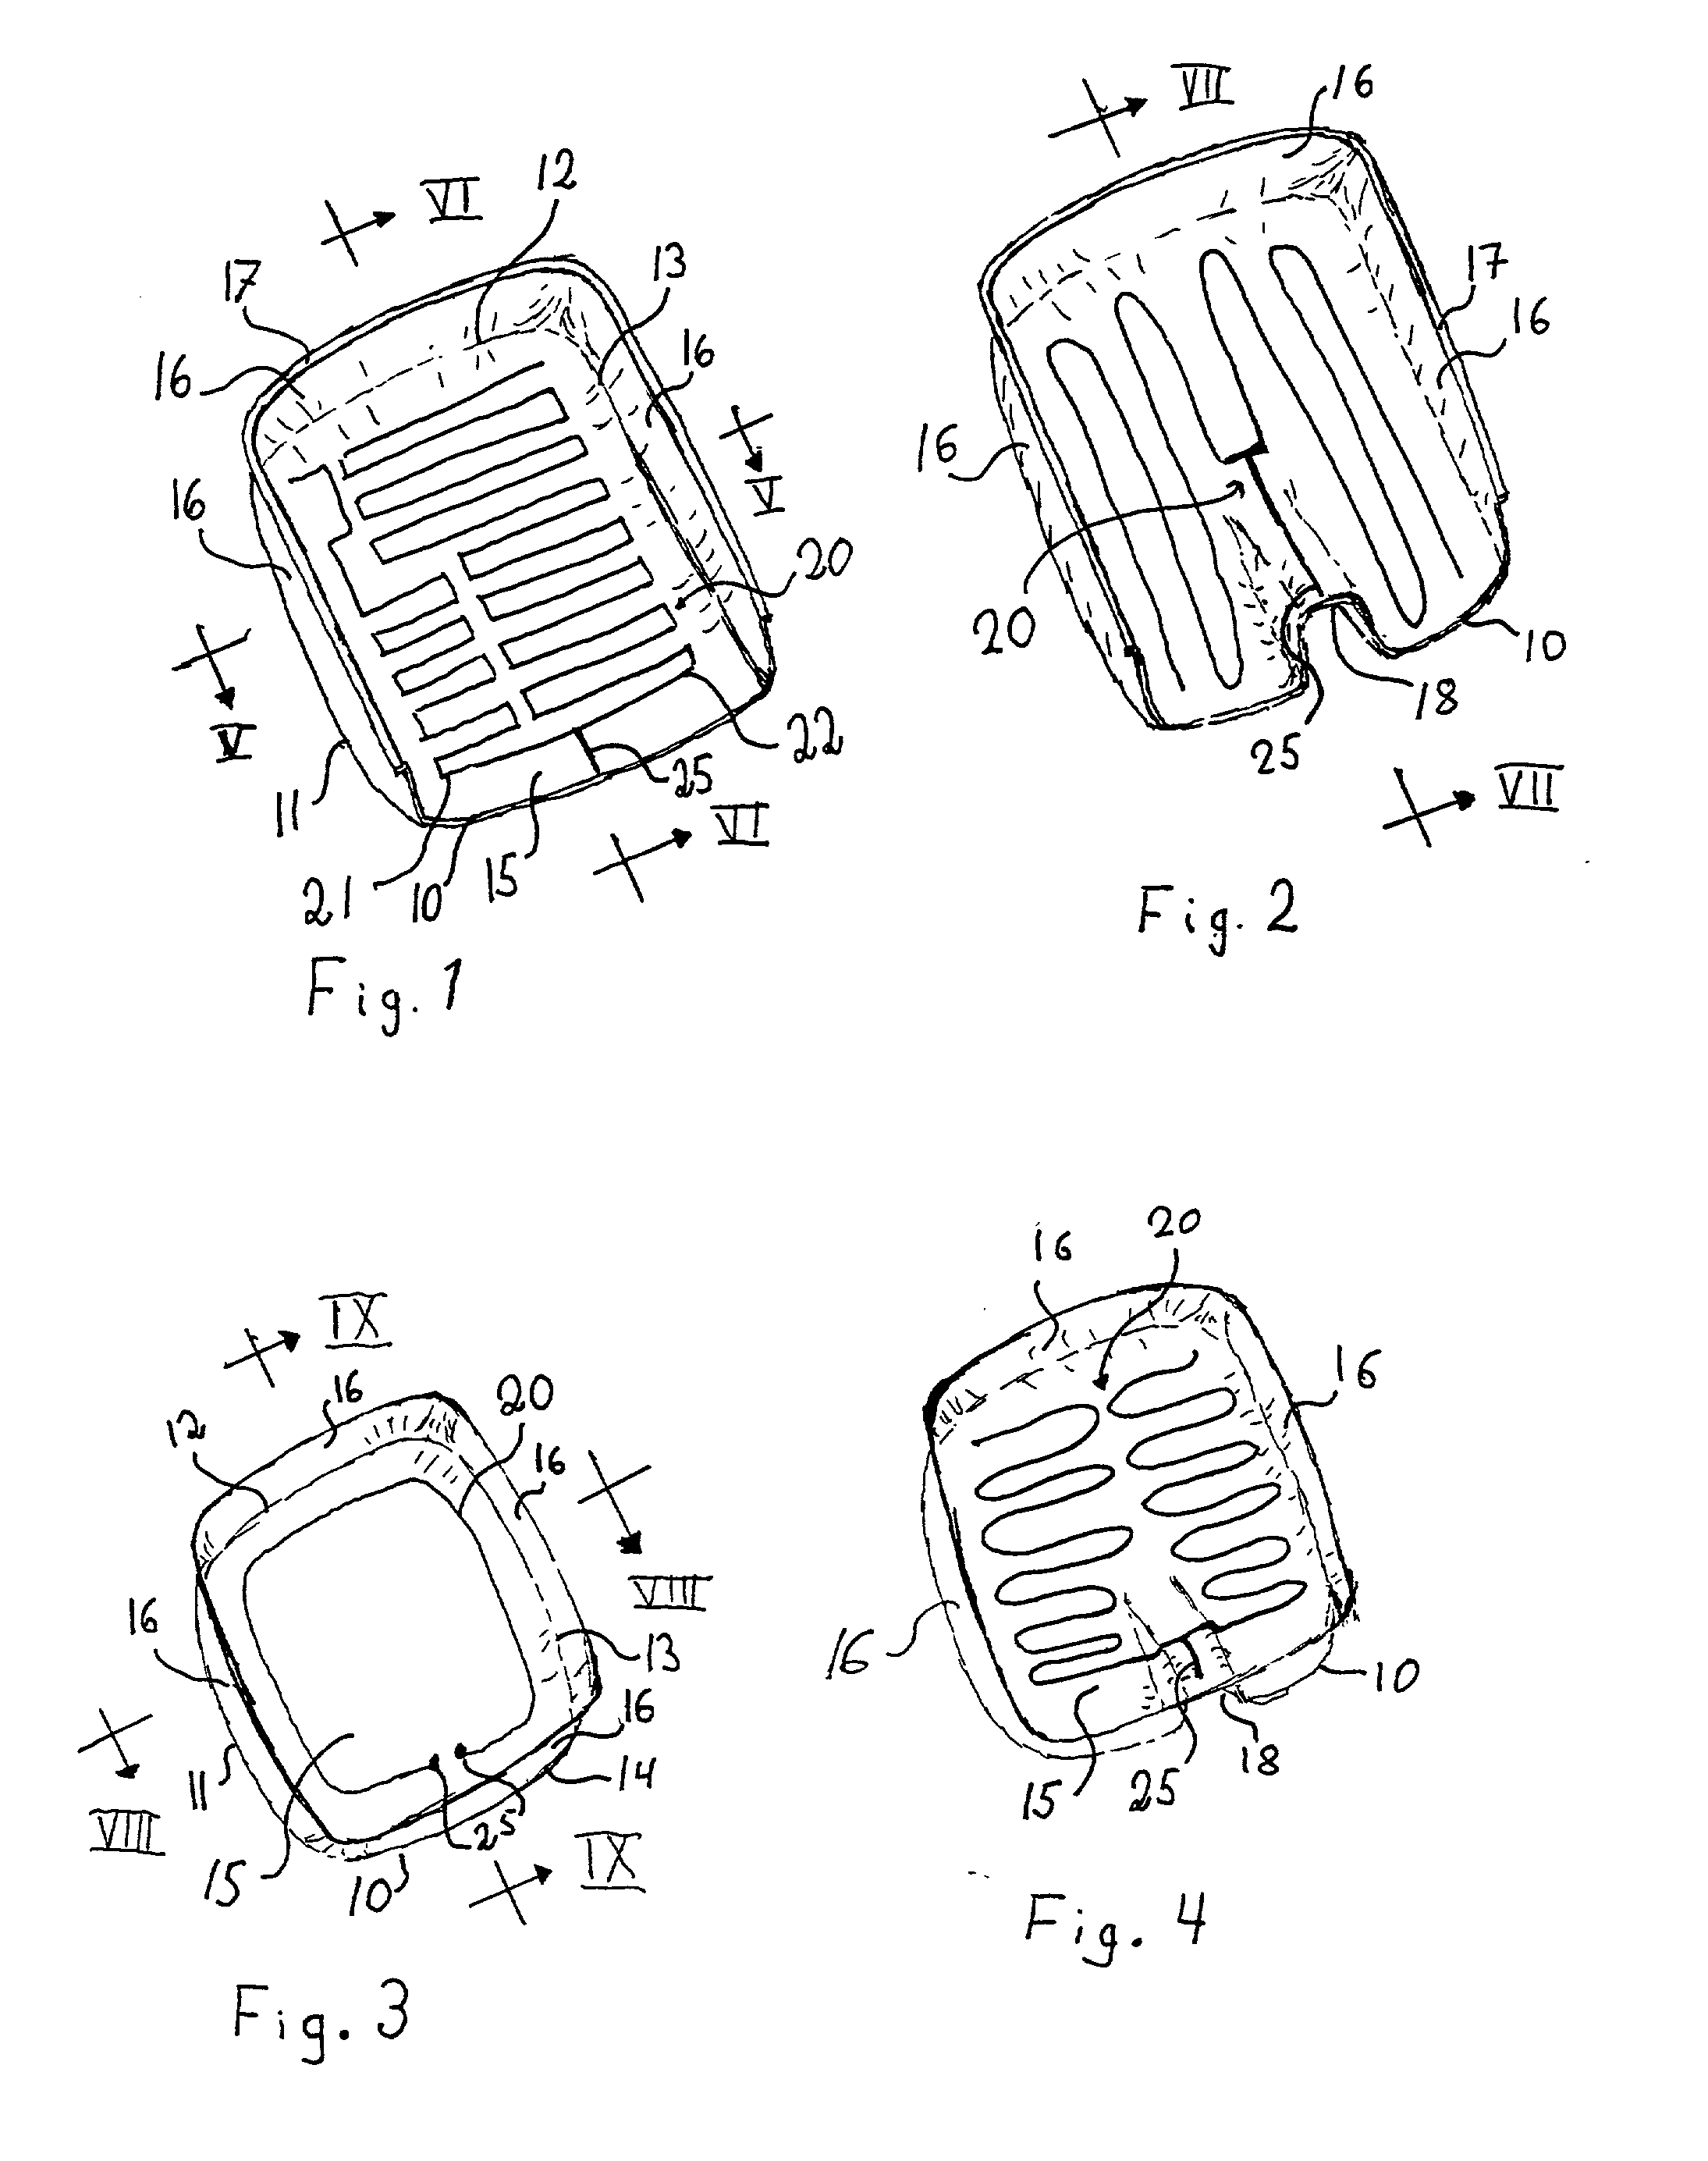 An antenna device, a method for manufacturing an antenna device and a radio communication device including an antenna device